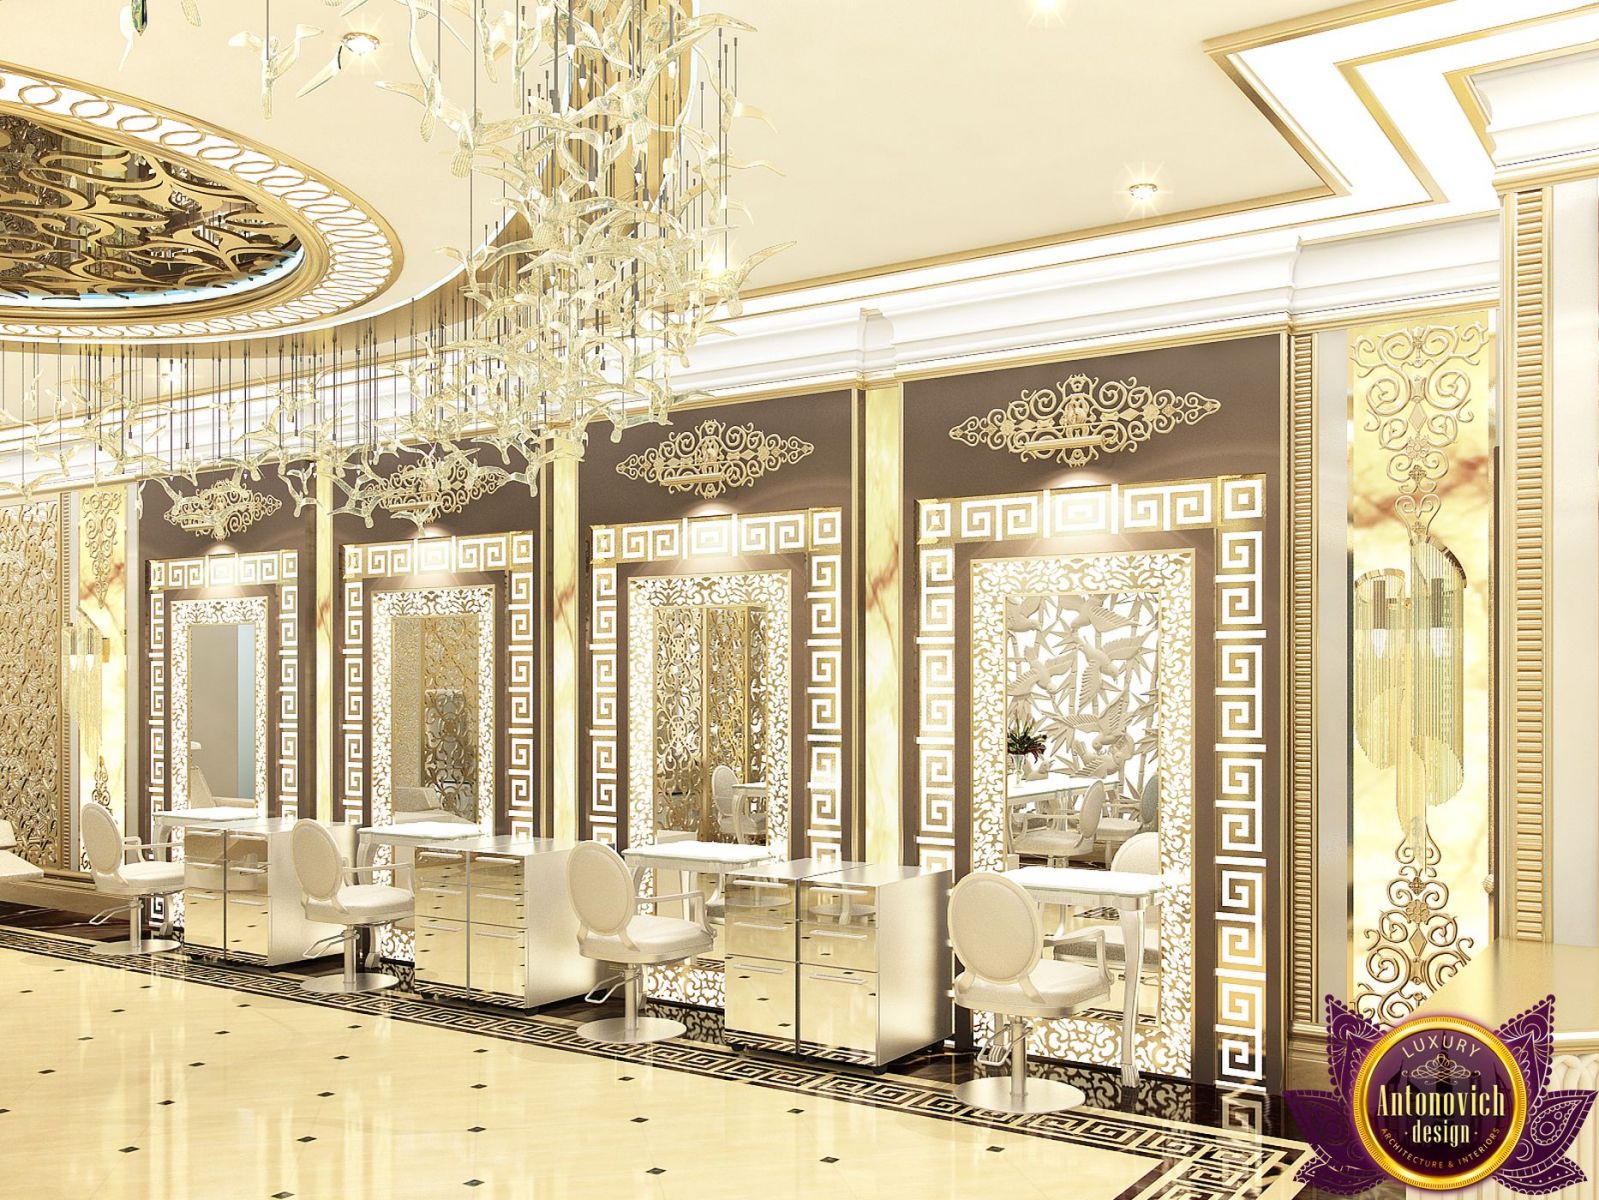 Sophisticated beauty salon interior with high-end finishes